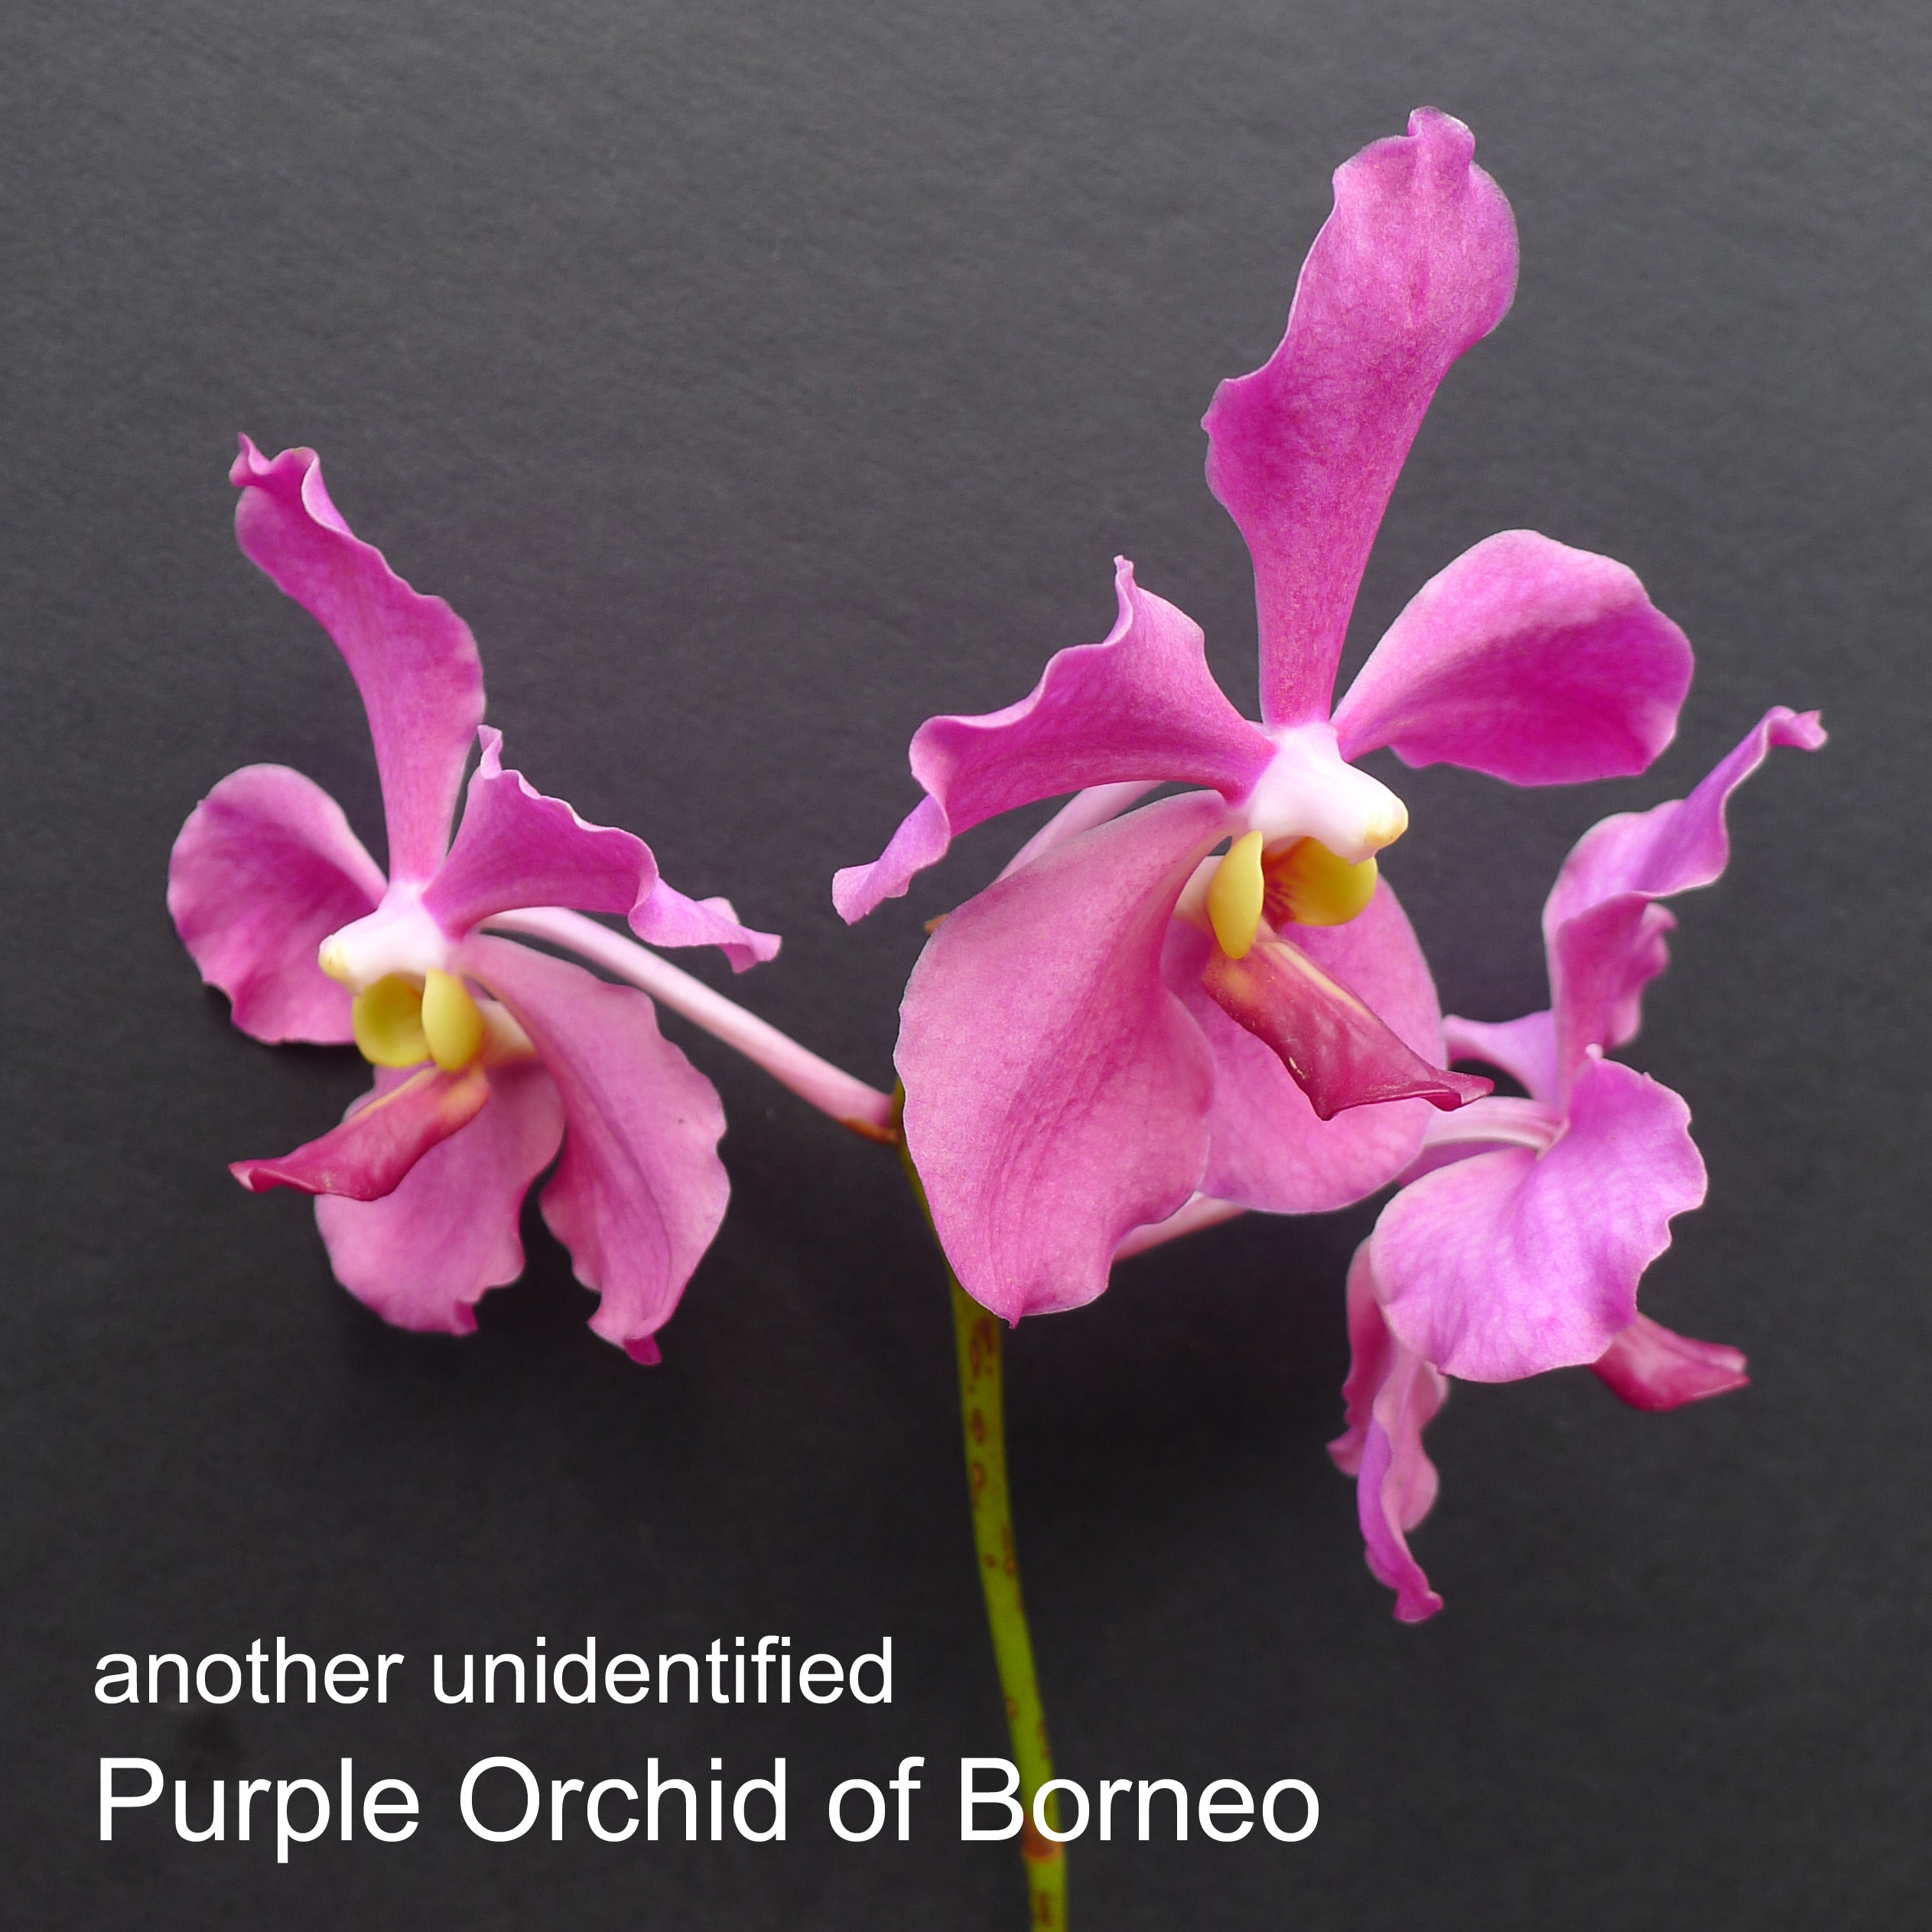 another unidentified Purple Orchid of Borneo